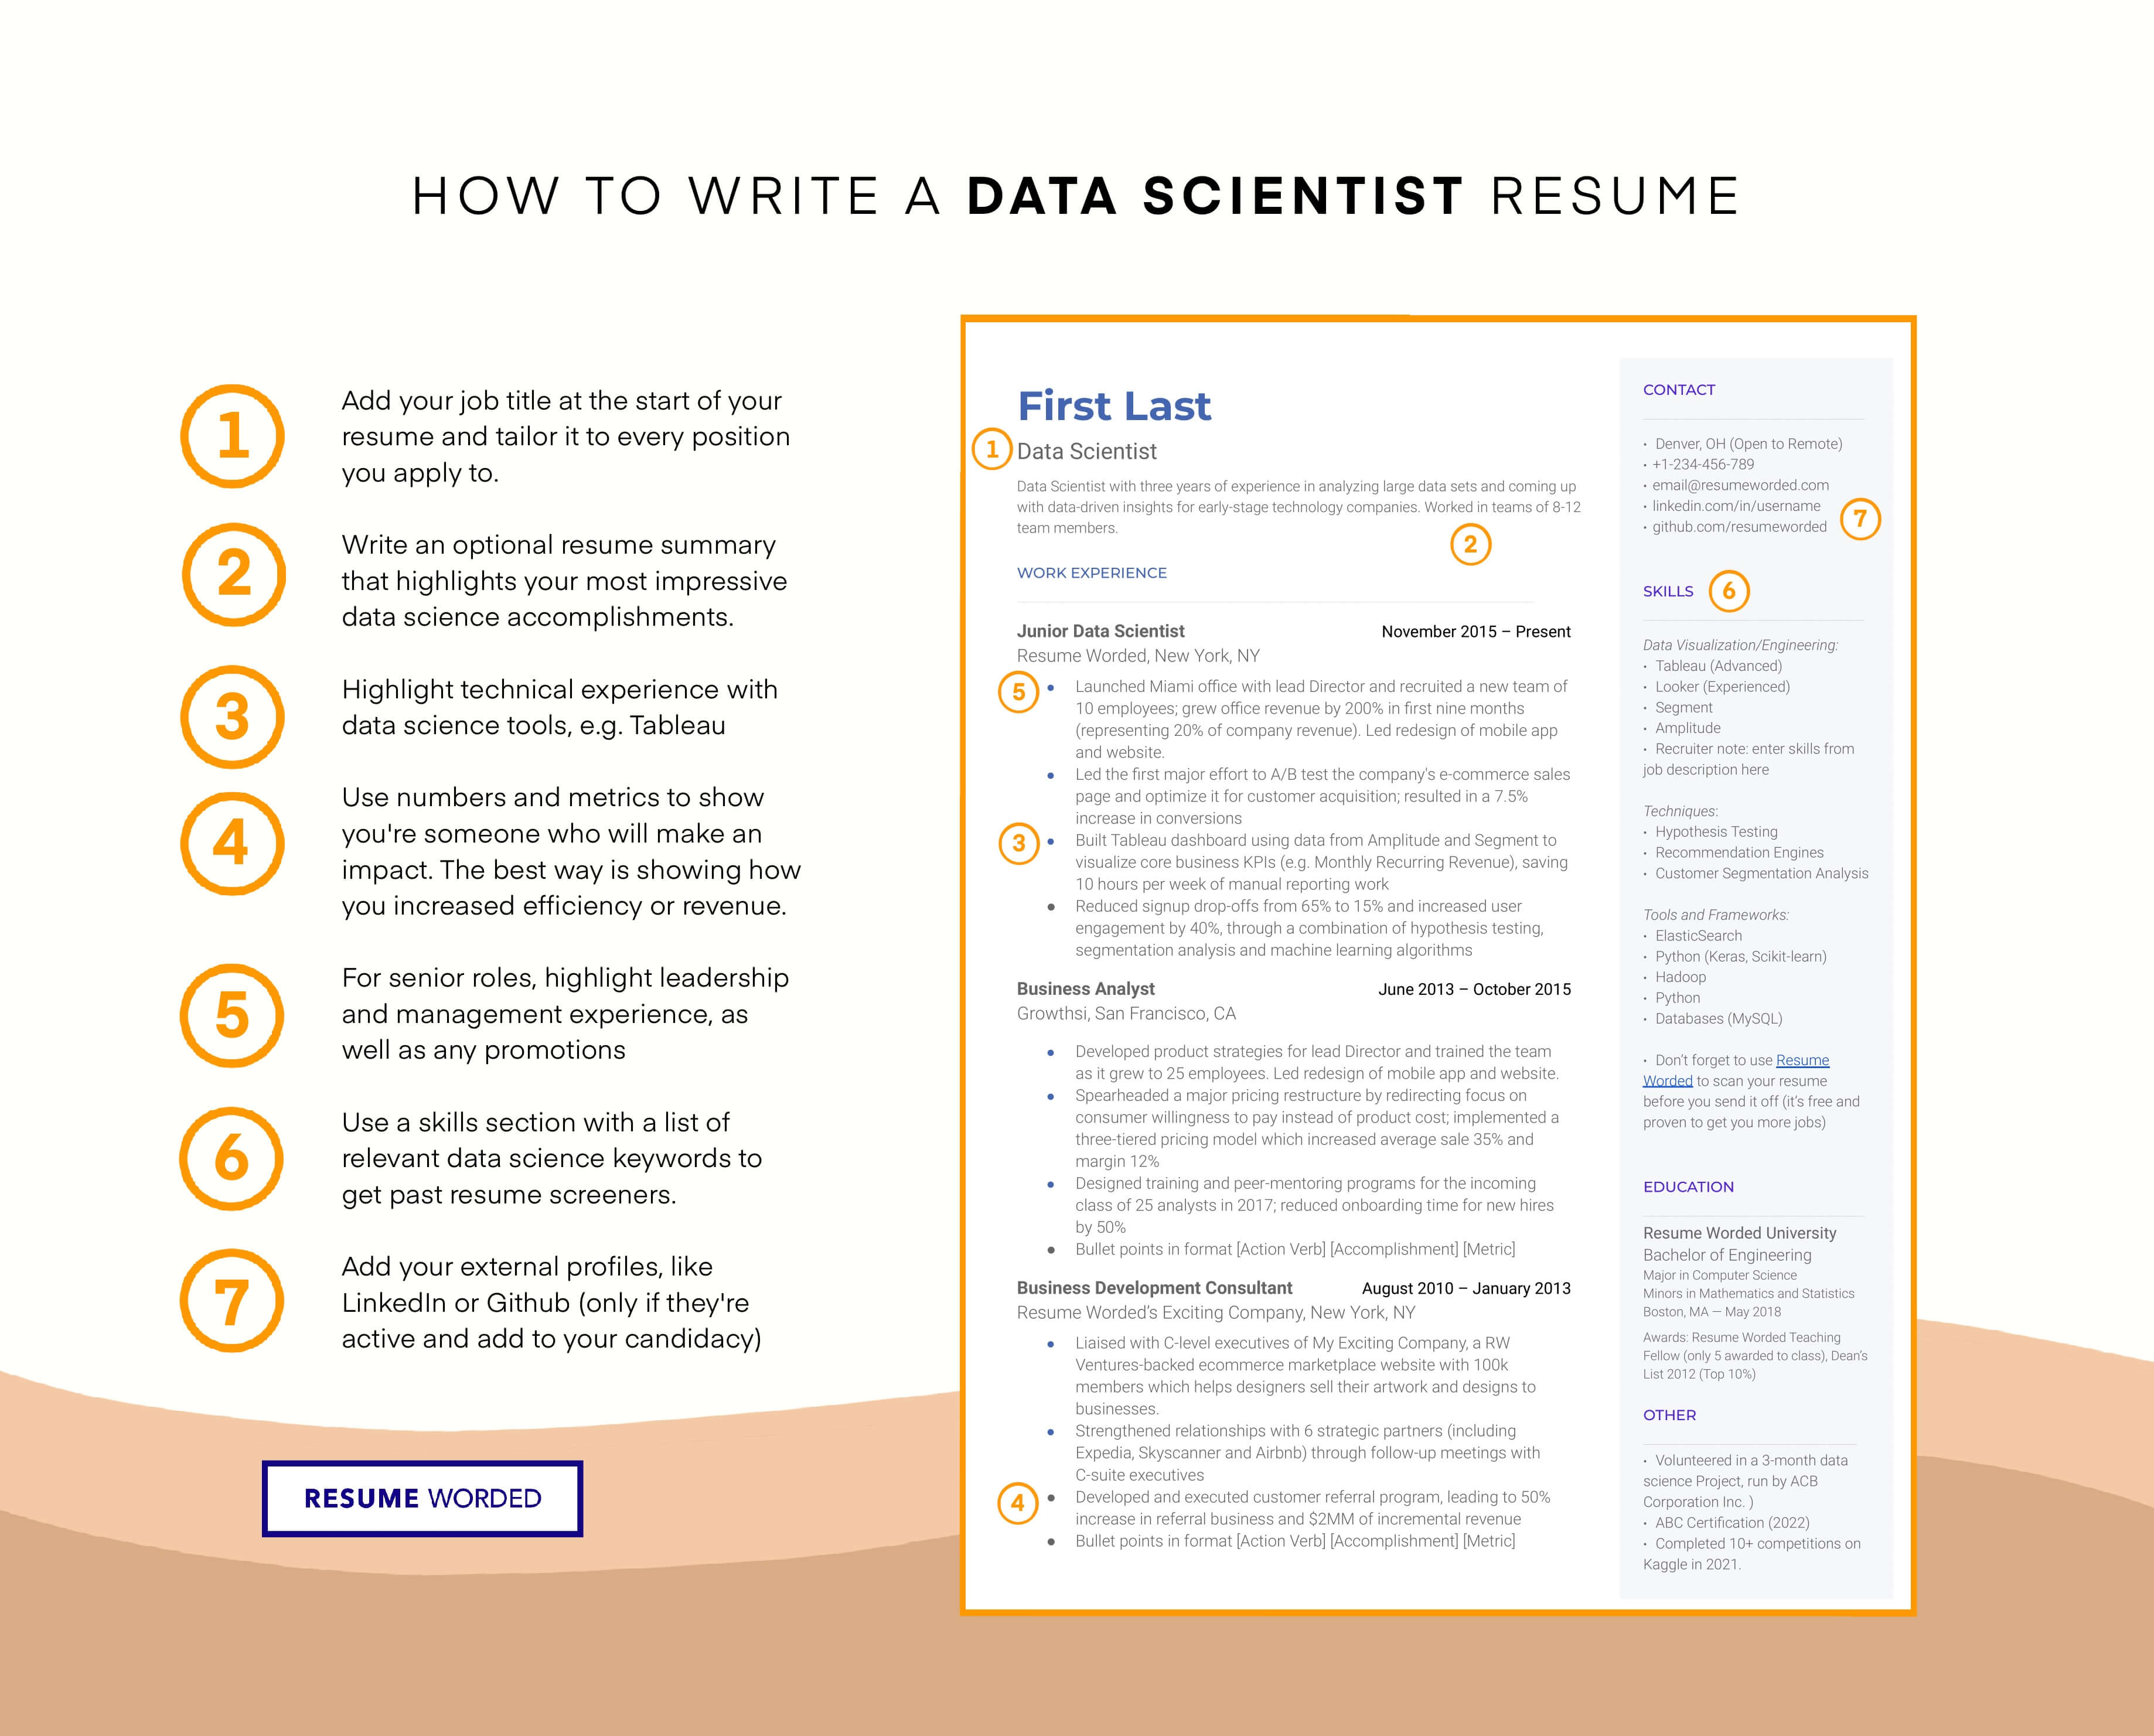 Make sure you highlight your data science skills (analytics, data recovery, and SQL). - Program Analyst Resume